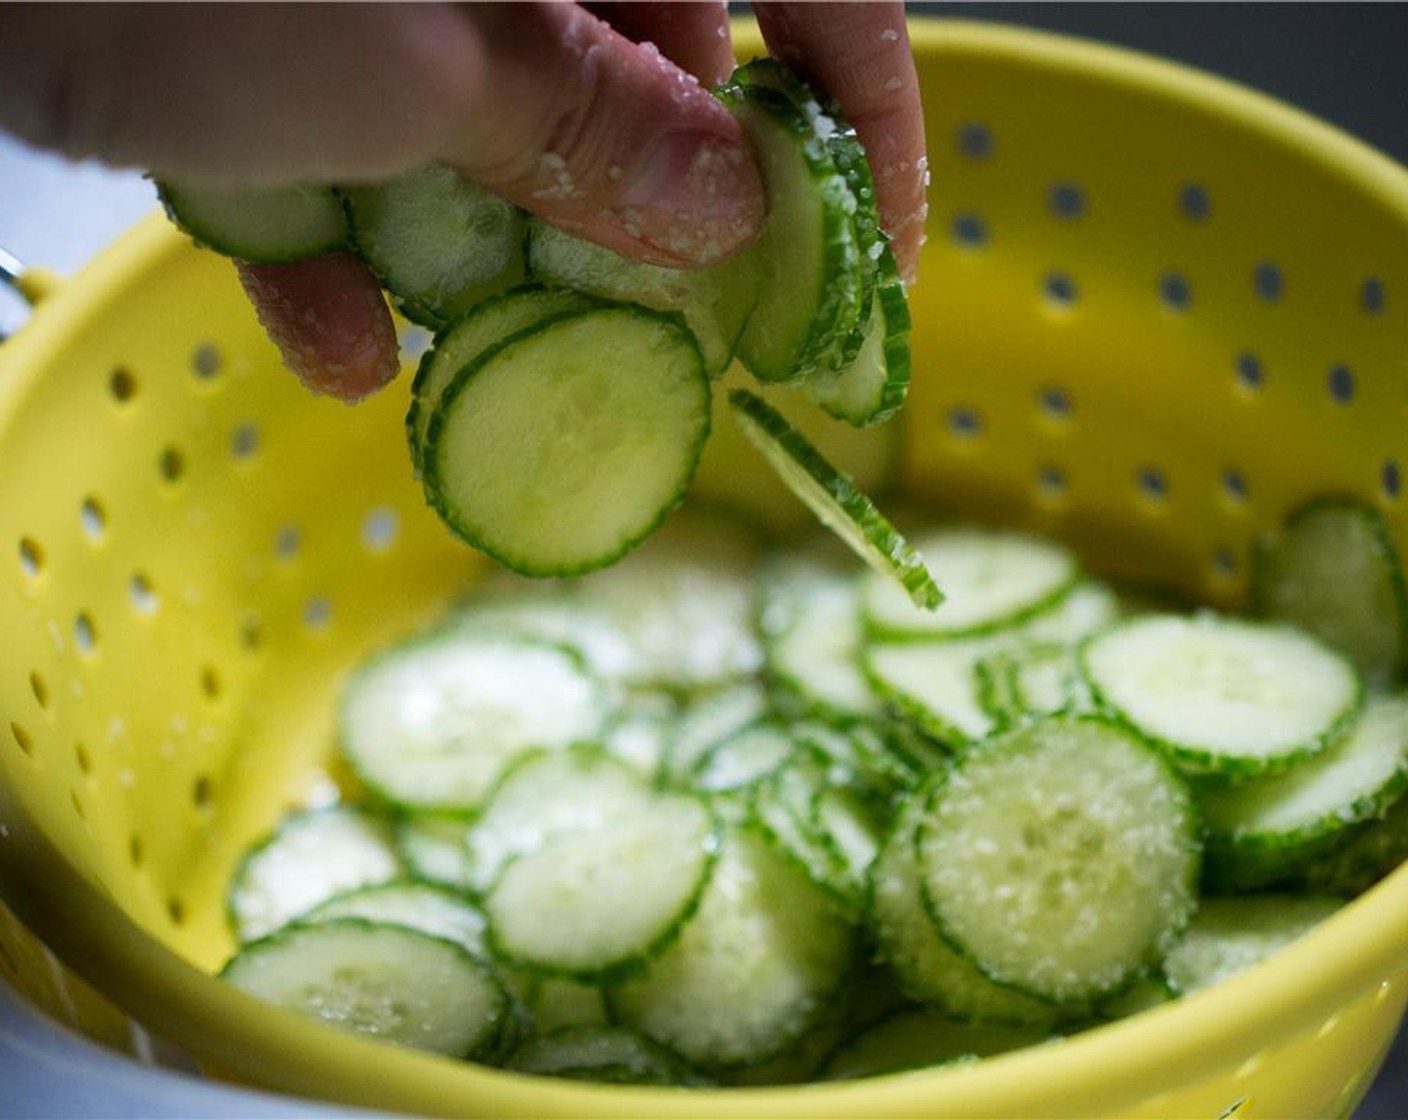 step 3 Sprinkle with Kosher Salt (1 Tbsp), tossing the cucumber slices to coat (this will draw out the moisture).  Allow to sit for 20 minutes.